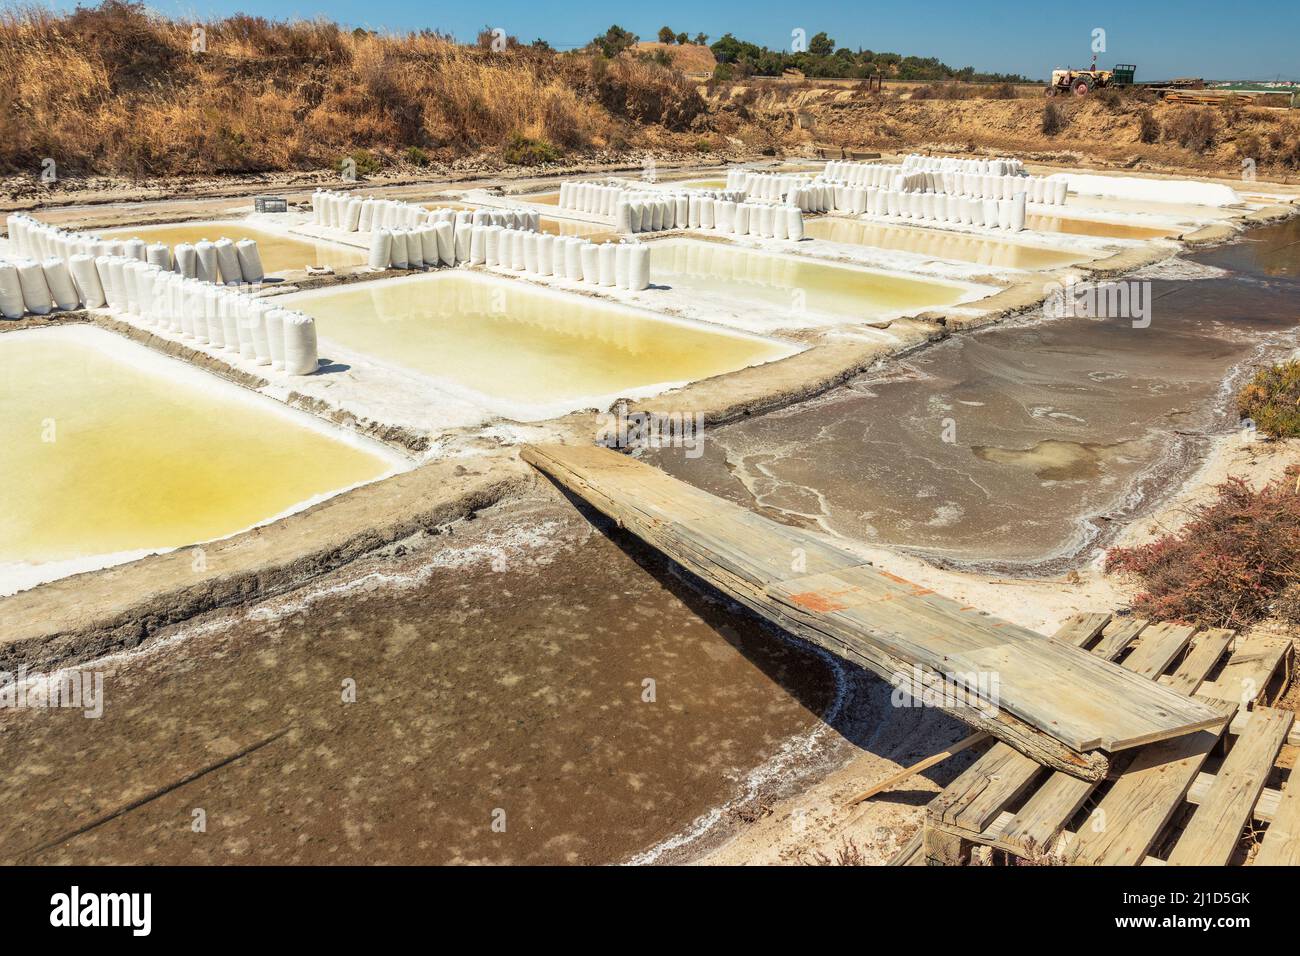 View of the Castro Marim salt pans in the Algarve, Portugal, with bags full of salt in the middle of a sunny day. Stock Photo